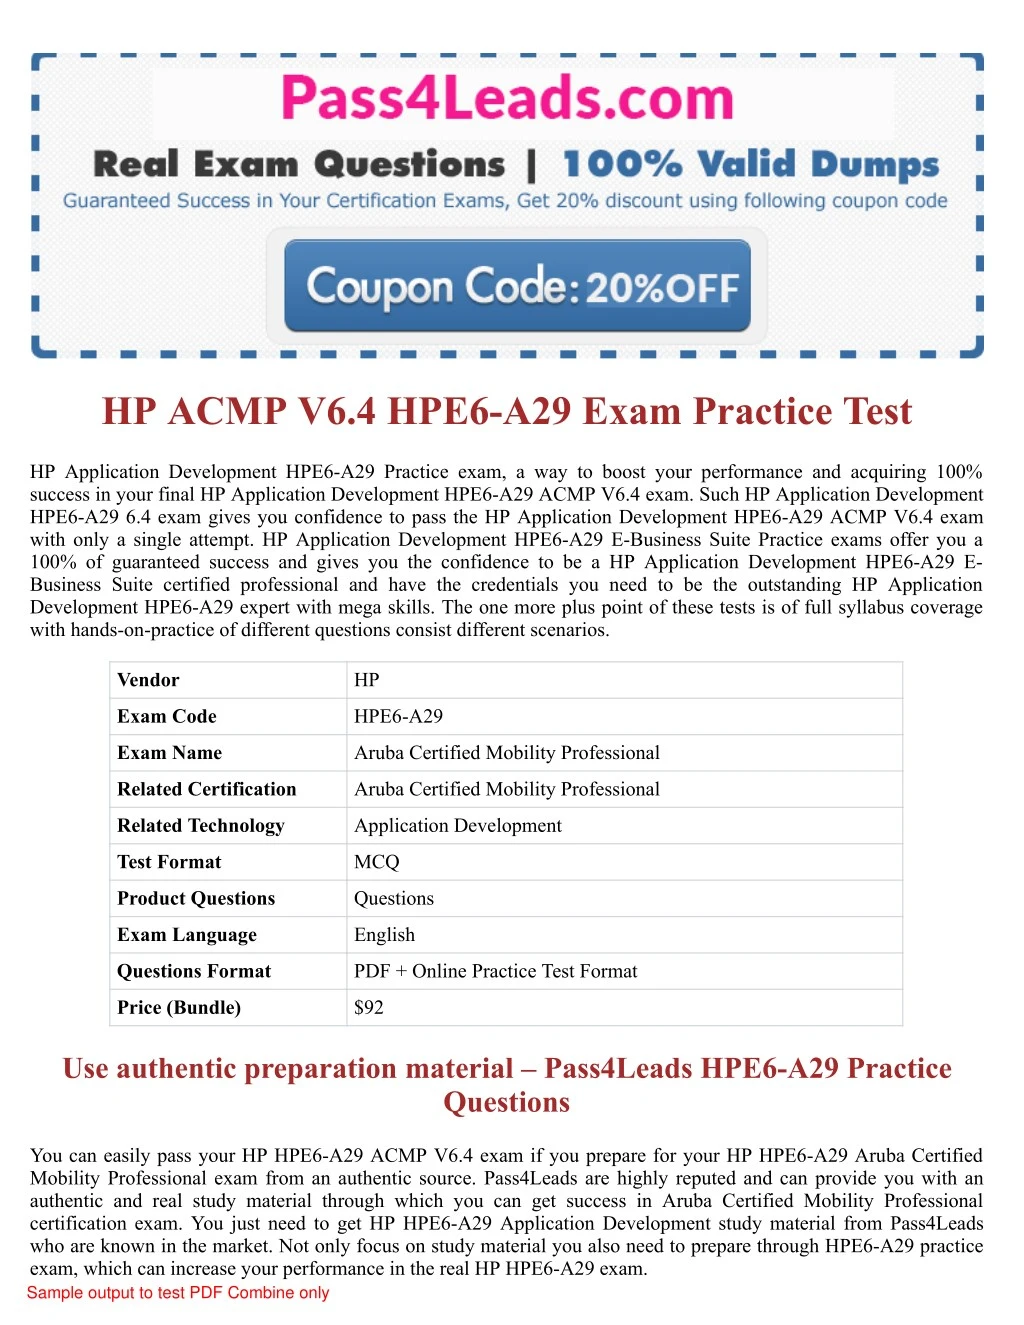 hp acmp v6 4 hpe6 a29 exam practice test